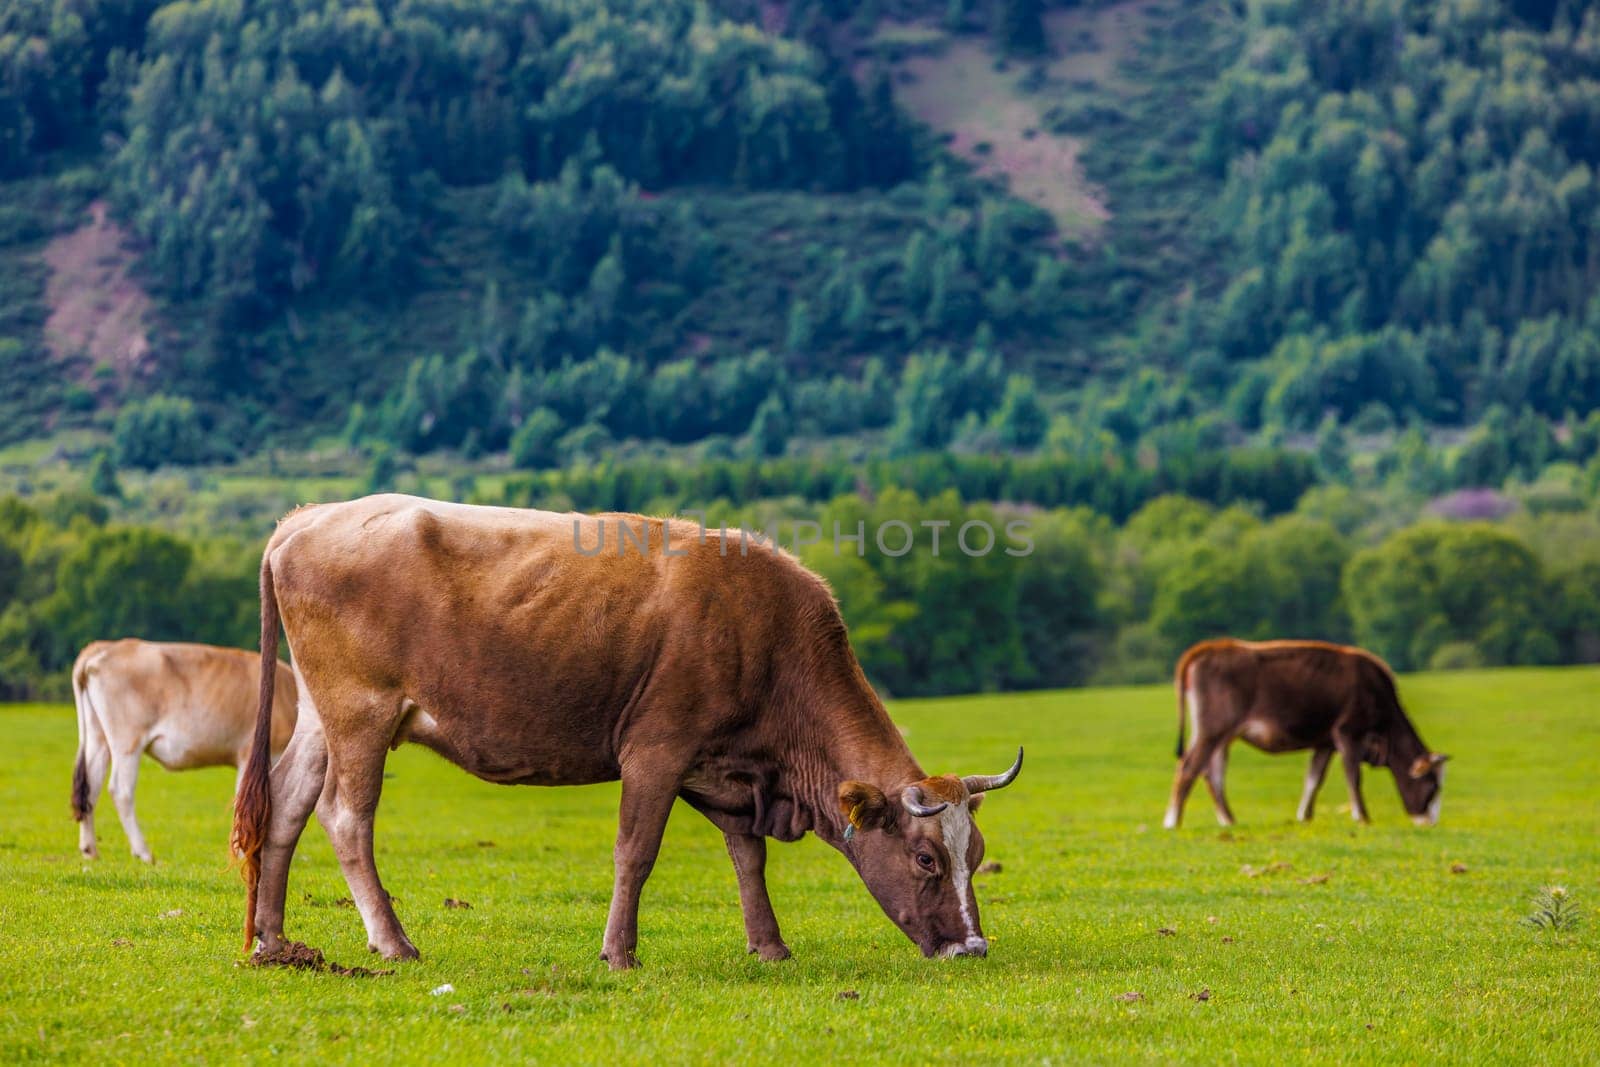 Cows grazing on green grass in mountainous natural landscape with cloudy sky by z1b